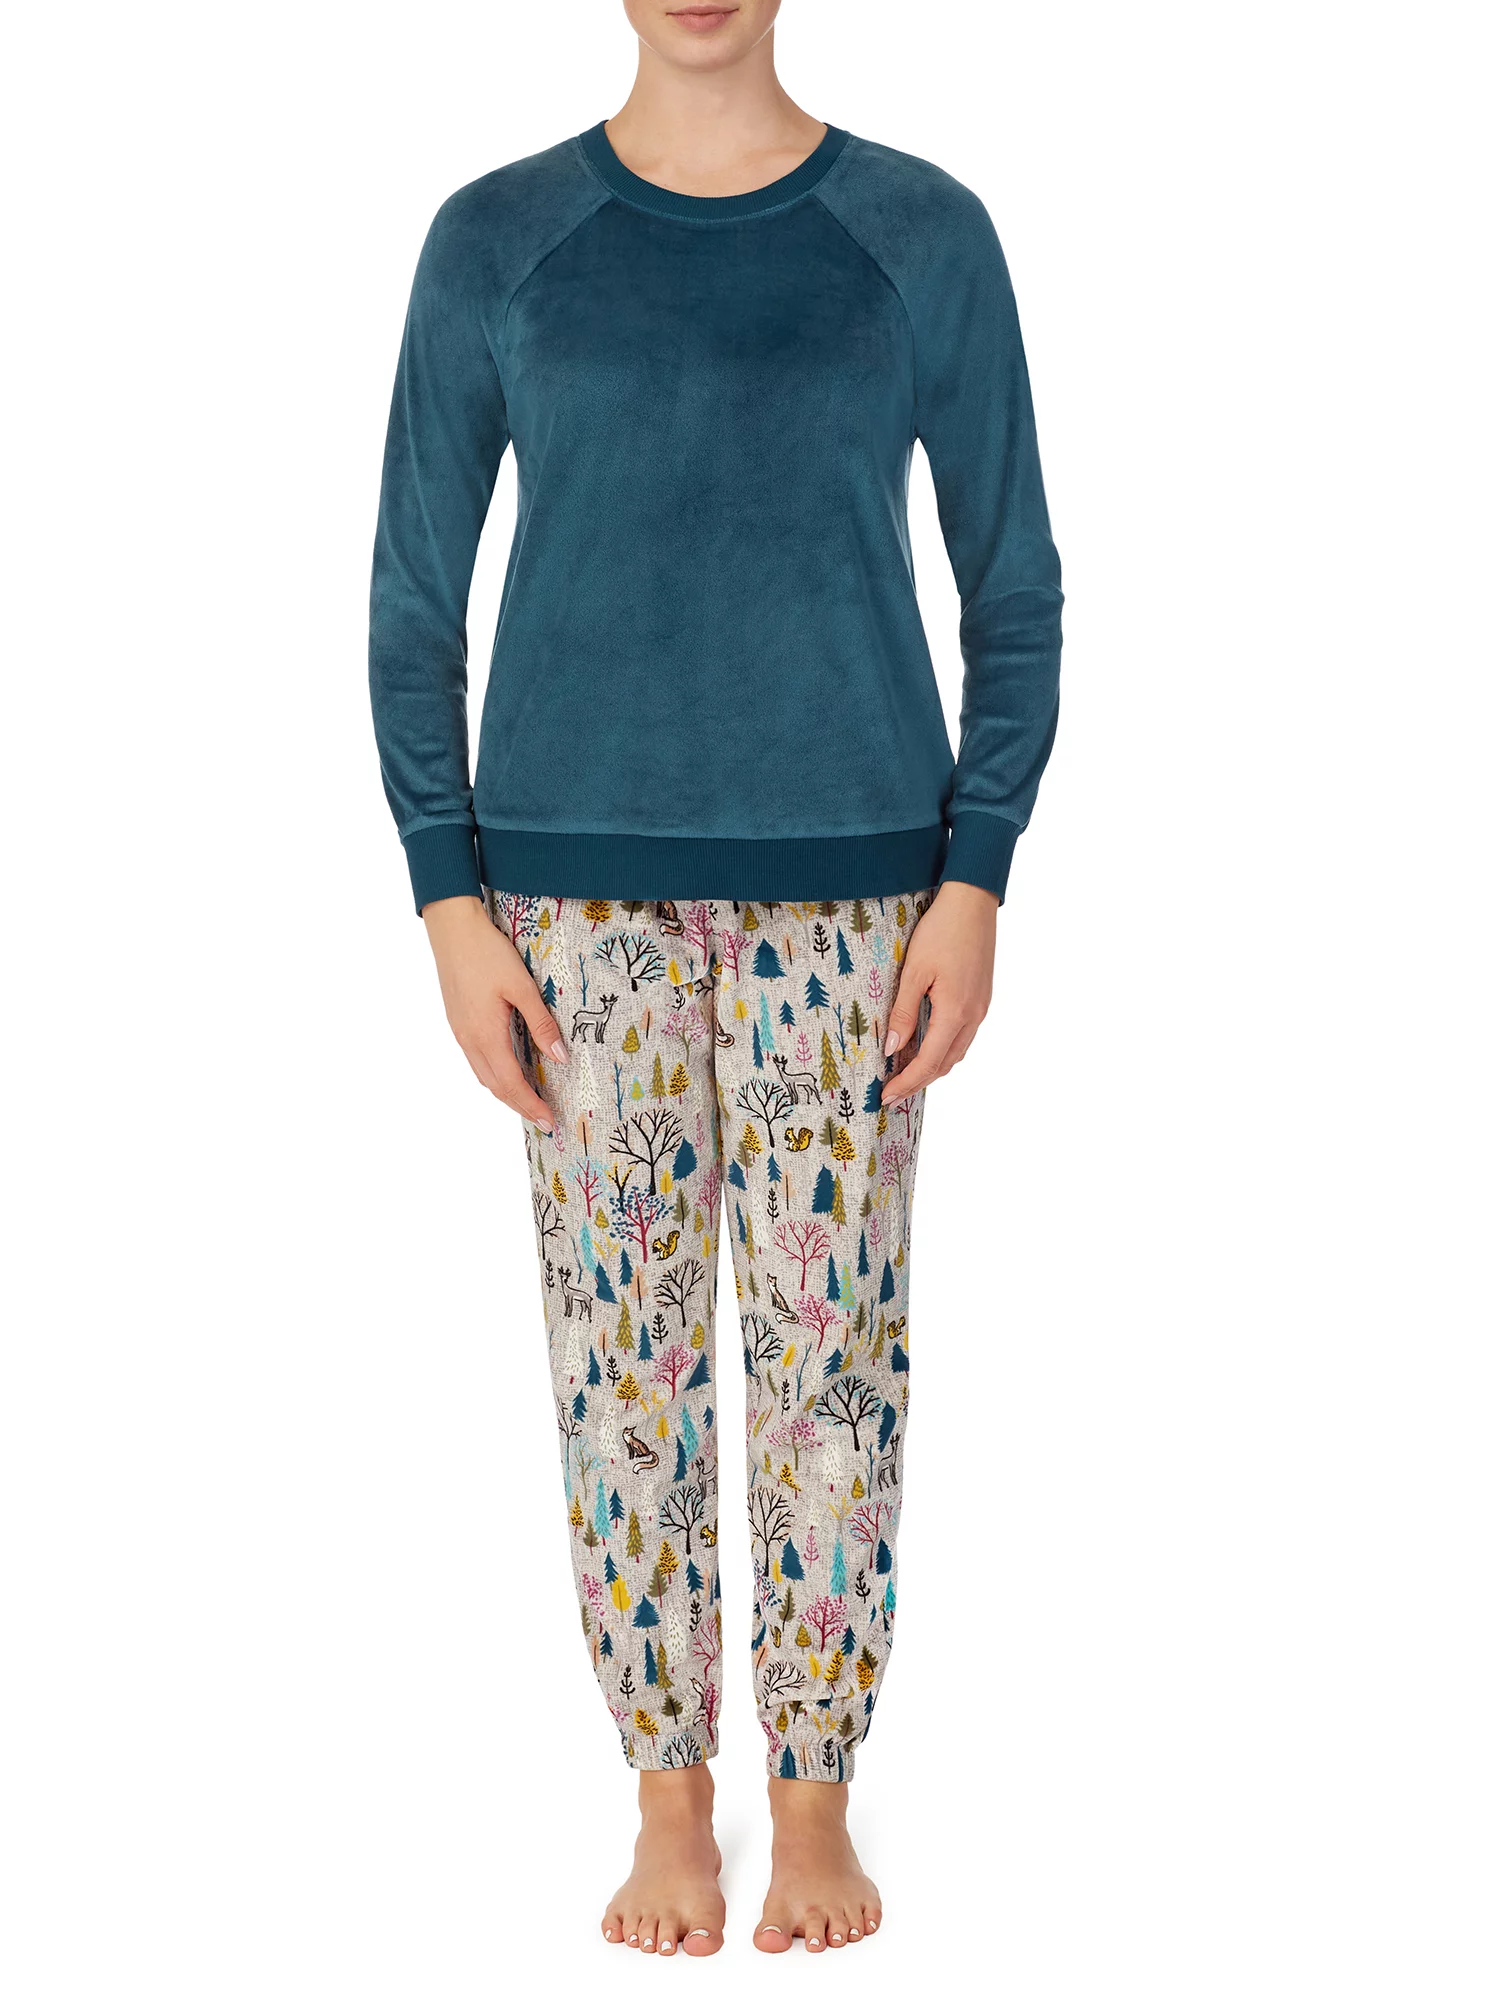 Secret Treasures Pajamas Set Fleece Lightweight NWT Long Sleeve Joggers  Womens Large Blue - $25 New With Tags - From Debbie